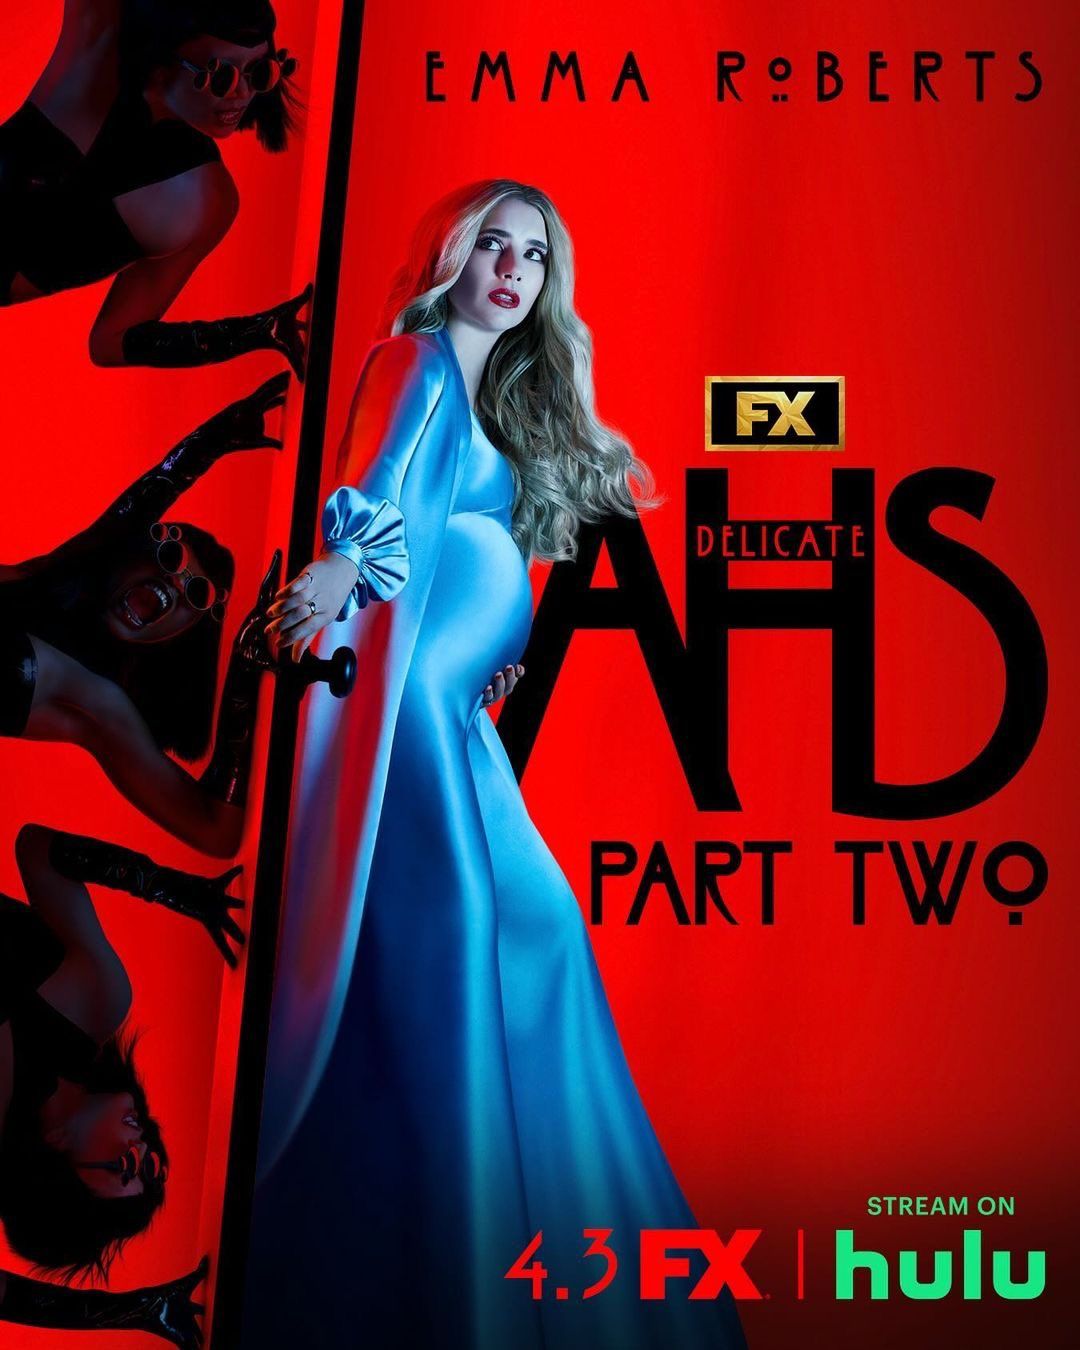 Pregnant Emma Roberts closes the door against demonic figures in poster for American Horror Story: Fragile Part 2